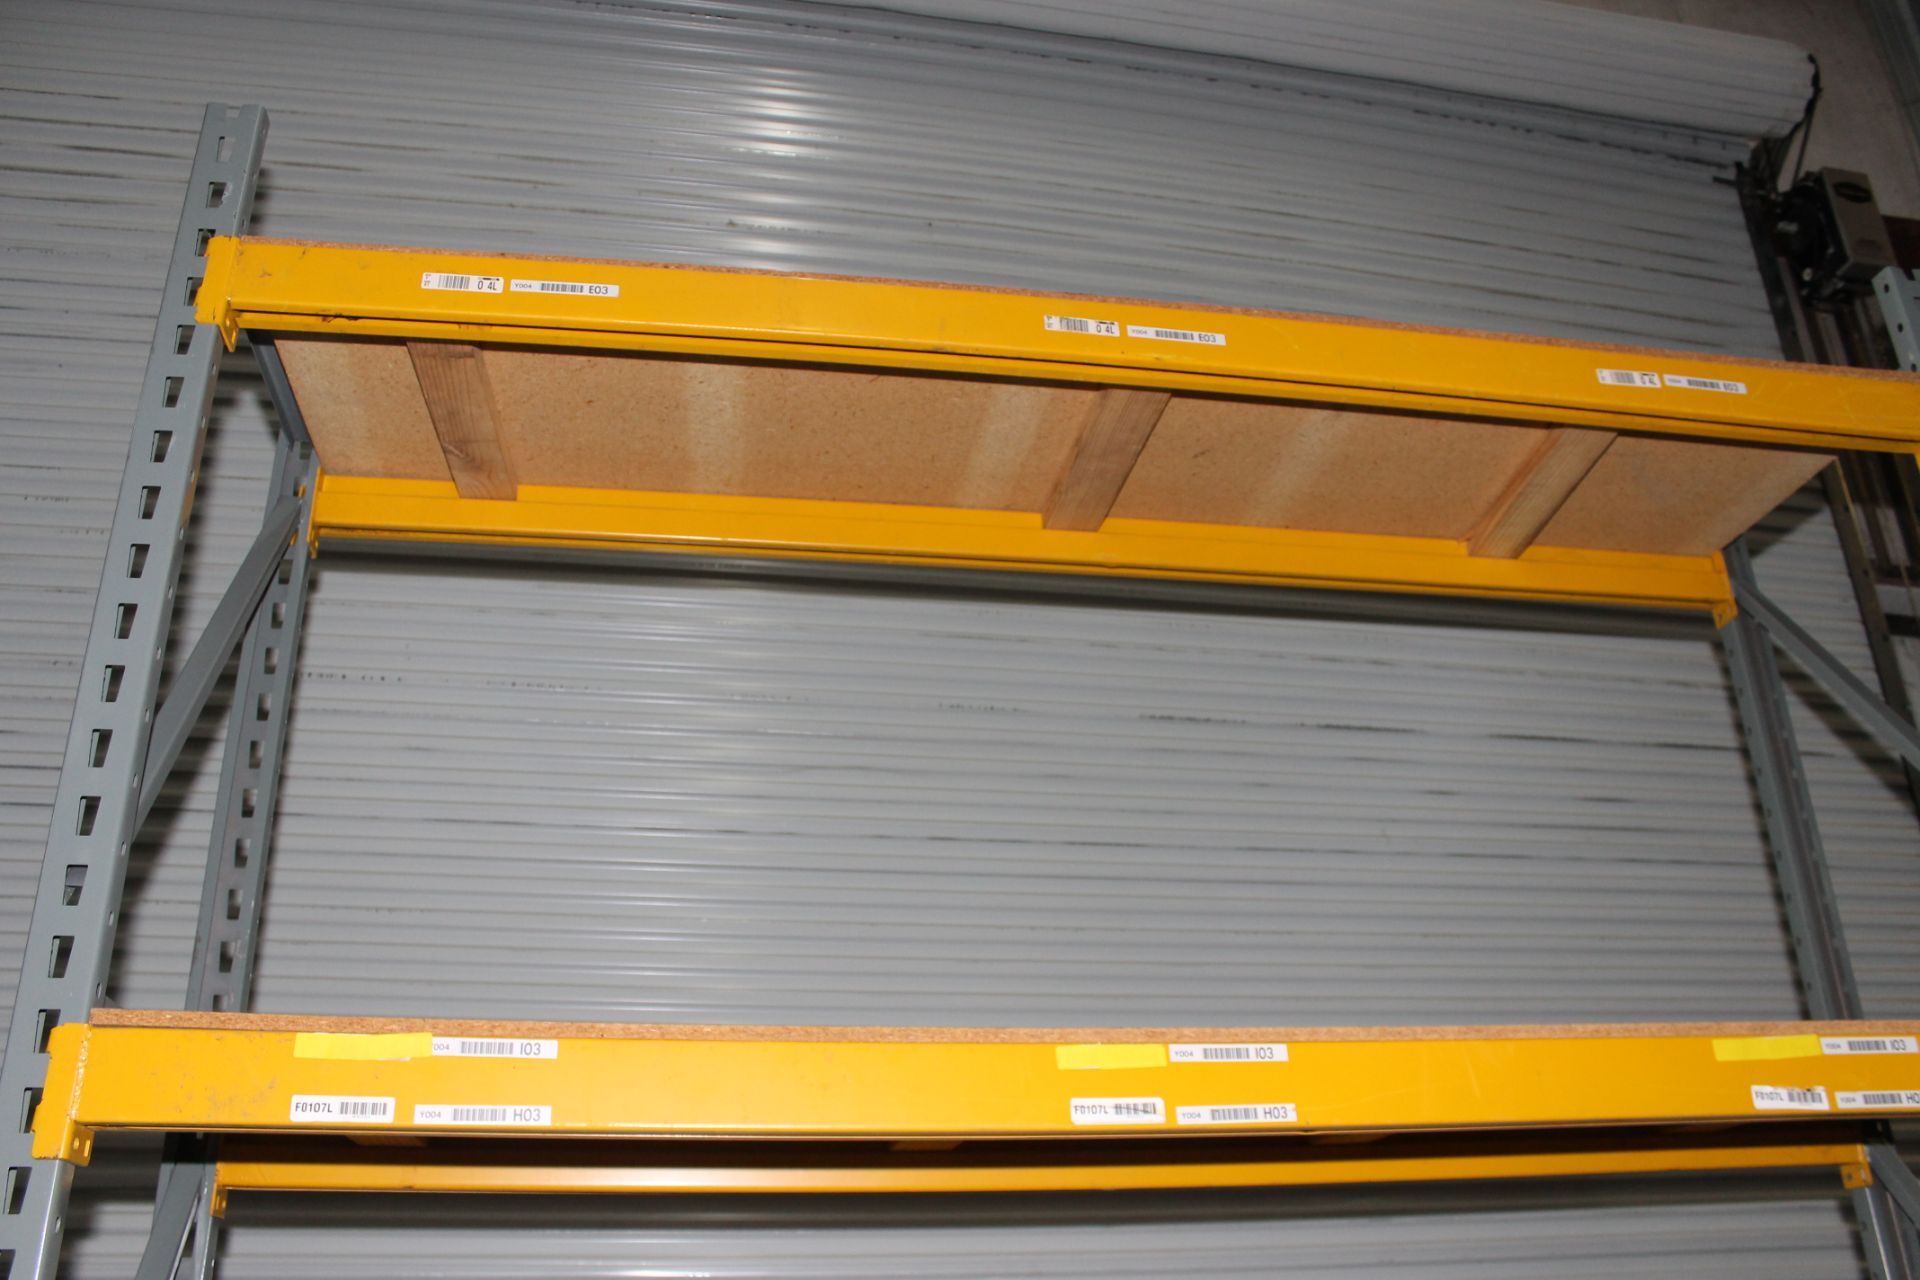 30 SECTIONS OF 96"H X 24"D X 96"L STOCK ROOM PALLET RACK SHELVING,  TOTAL 30 SECTIONS, 3 ROWS - Image 3 of 5